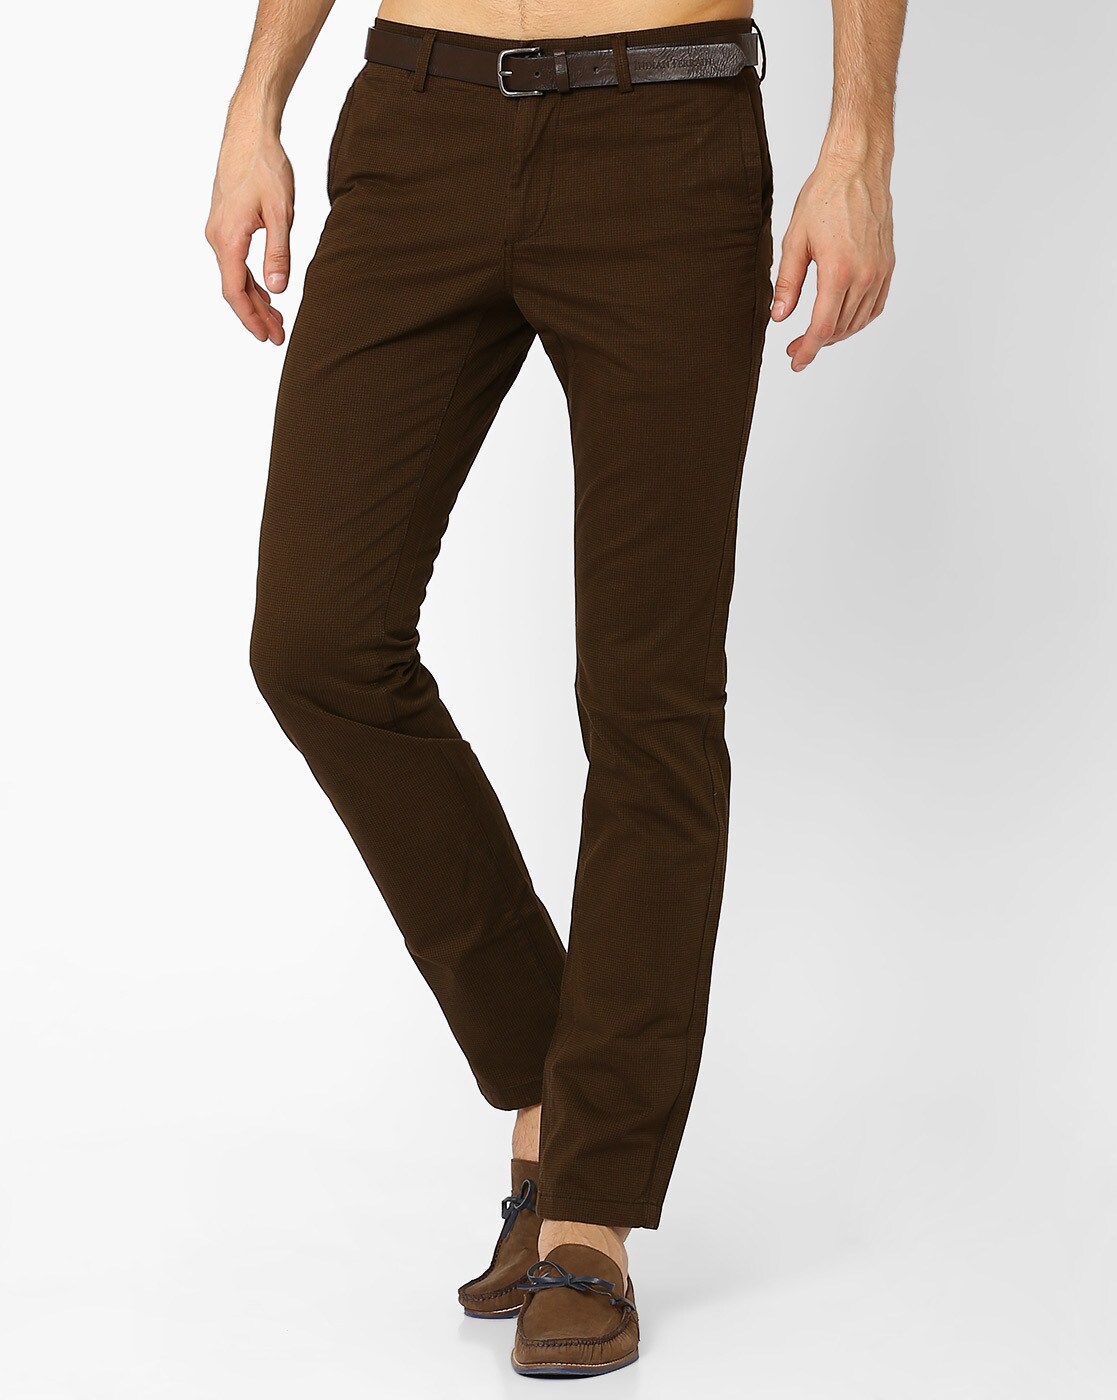 Extra Slim Brown Linen-blend Stretch Suit Pant | Express